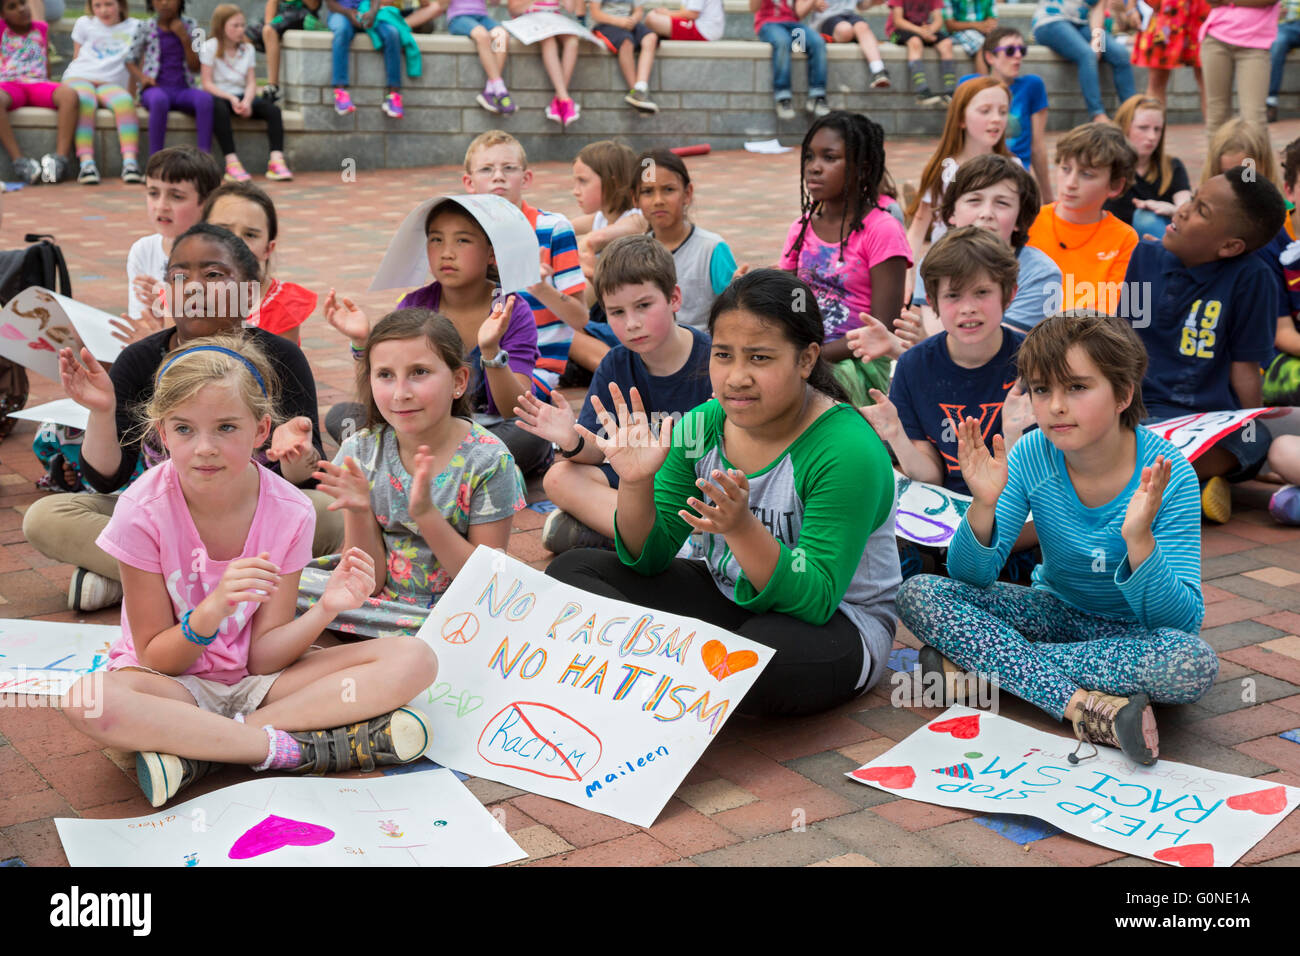 Asheville, North Carolina - Public school students from Isaac Dickson Elementary School participate in a rally against racism. Stock Photo